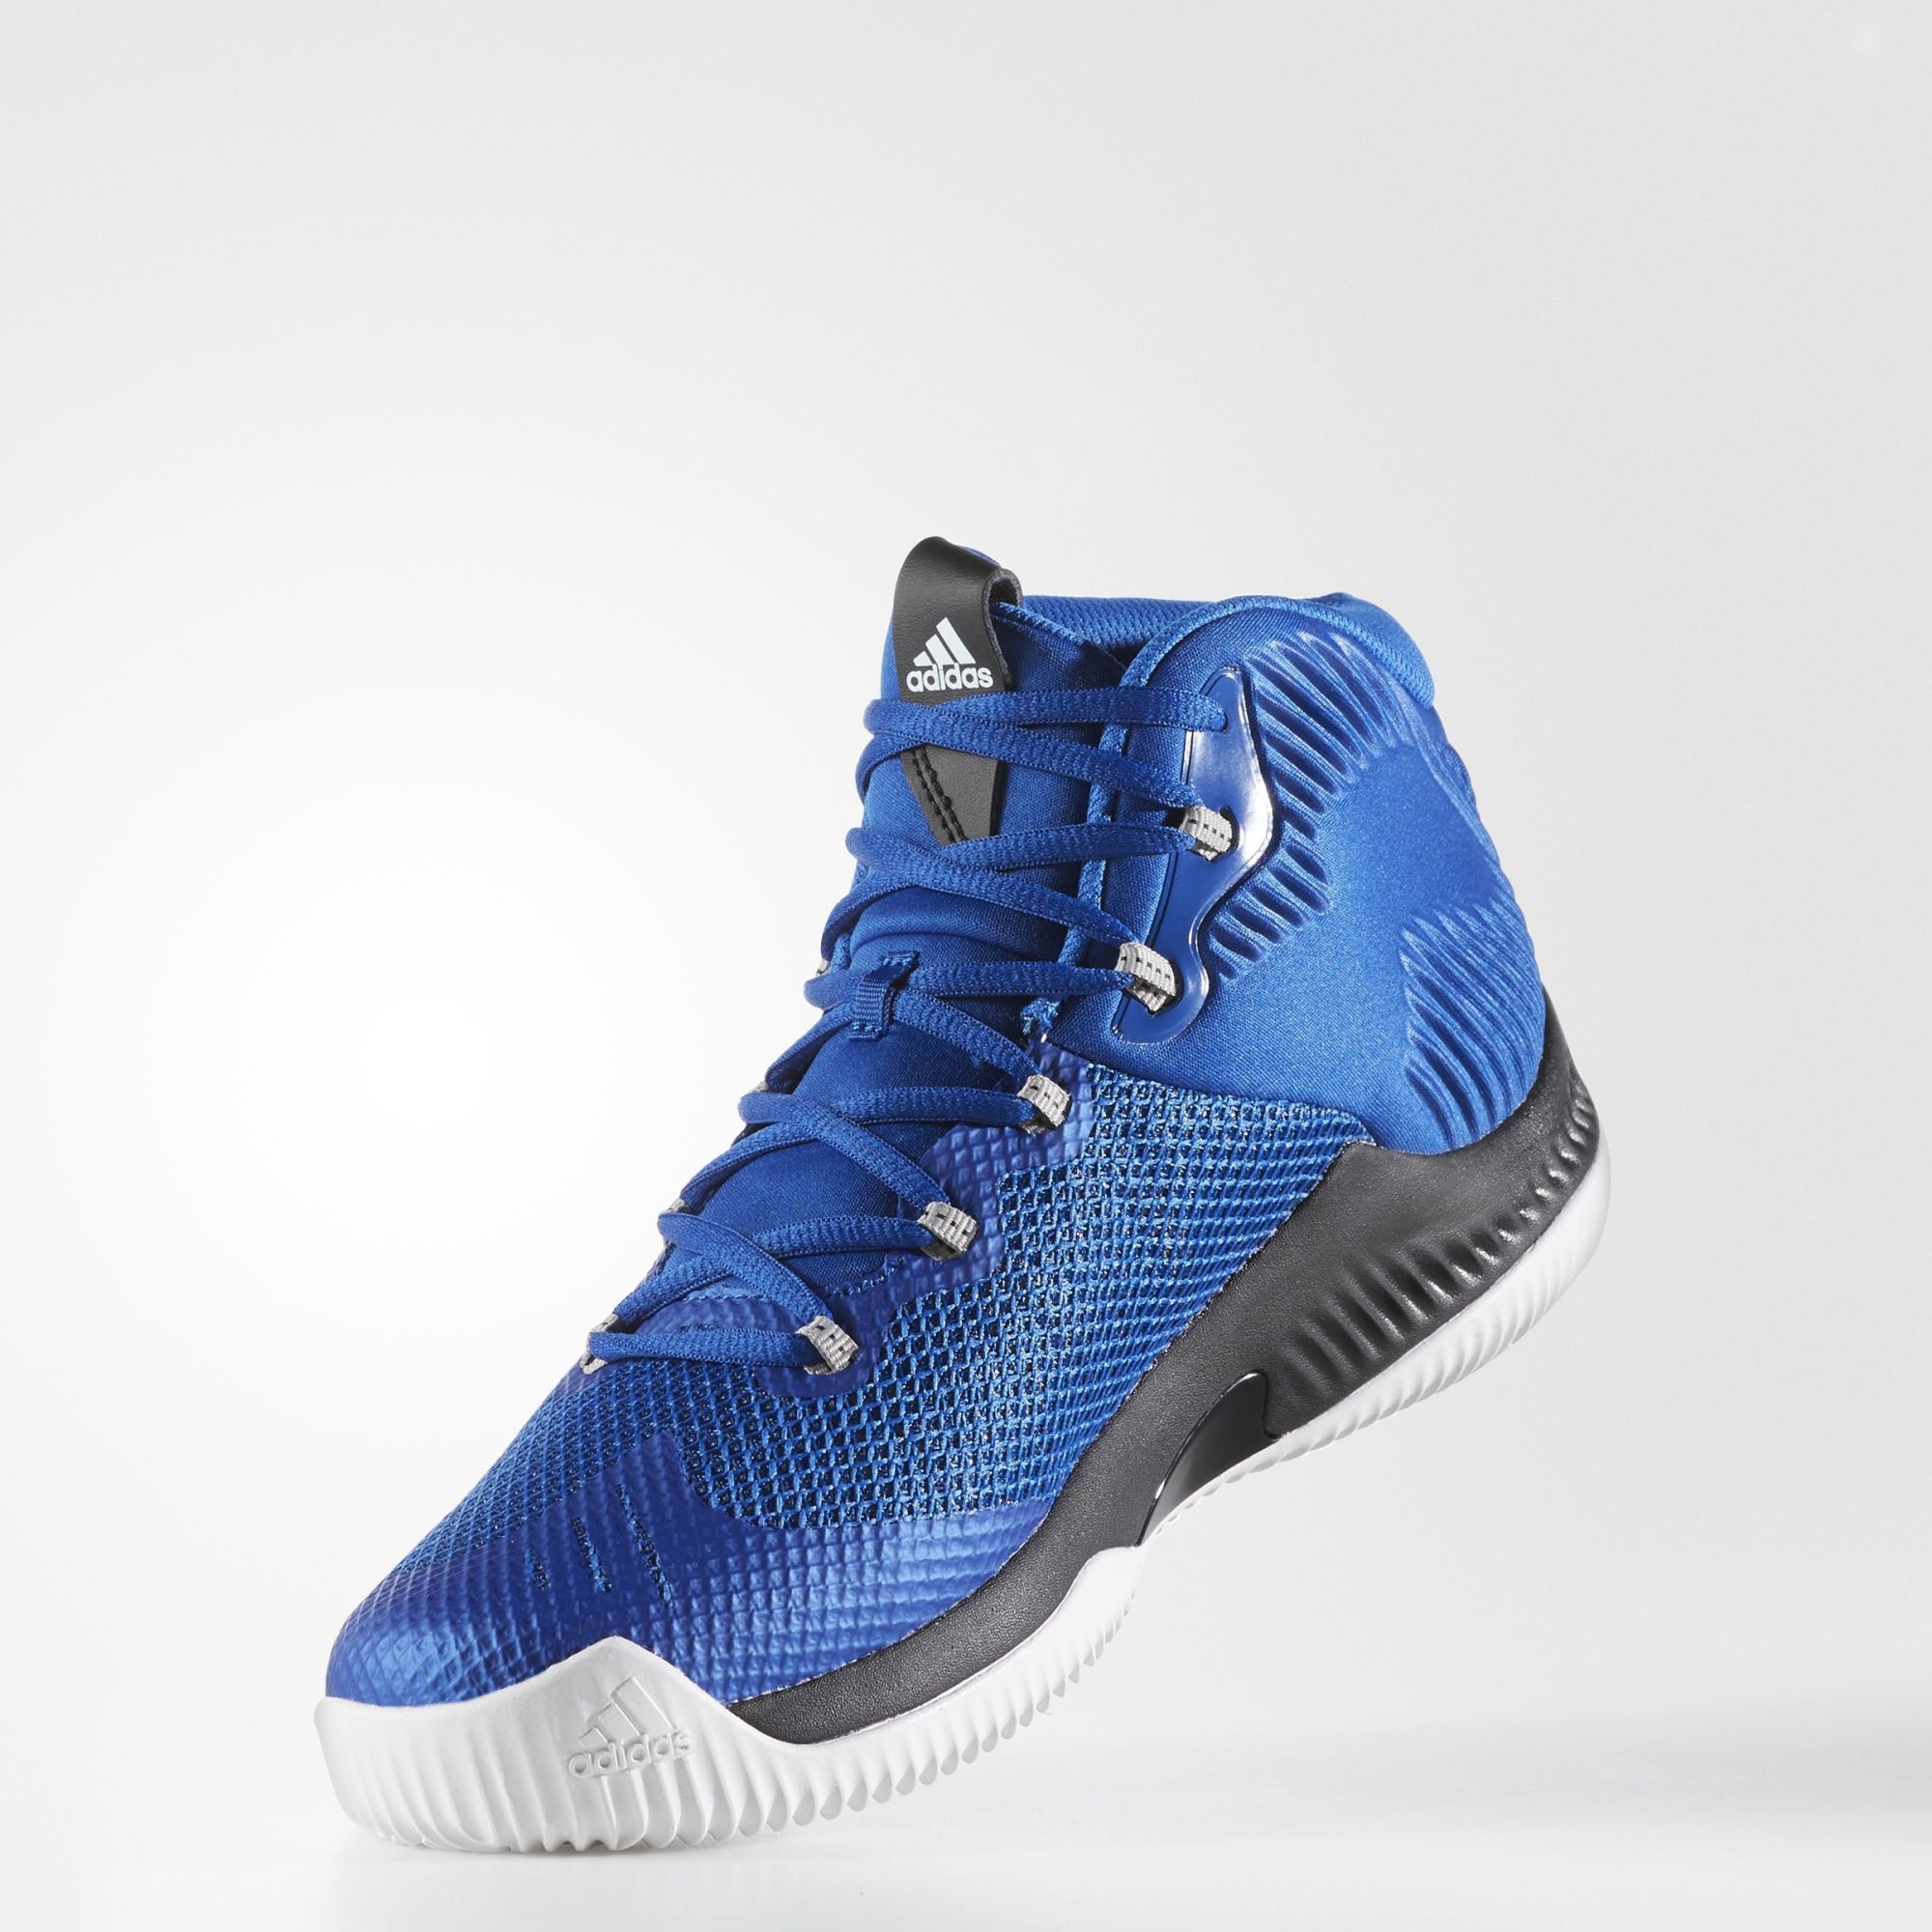 The adidas Crazy Hustle Has Dropped in a New Colorway - WearTesters